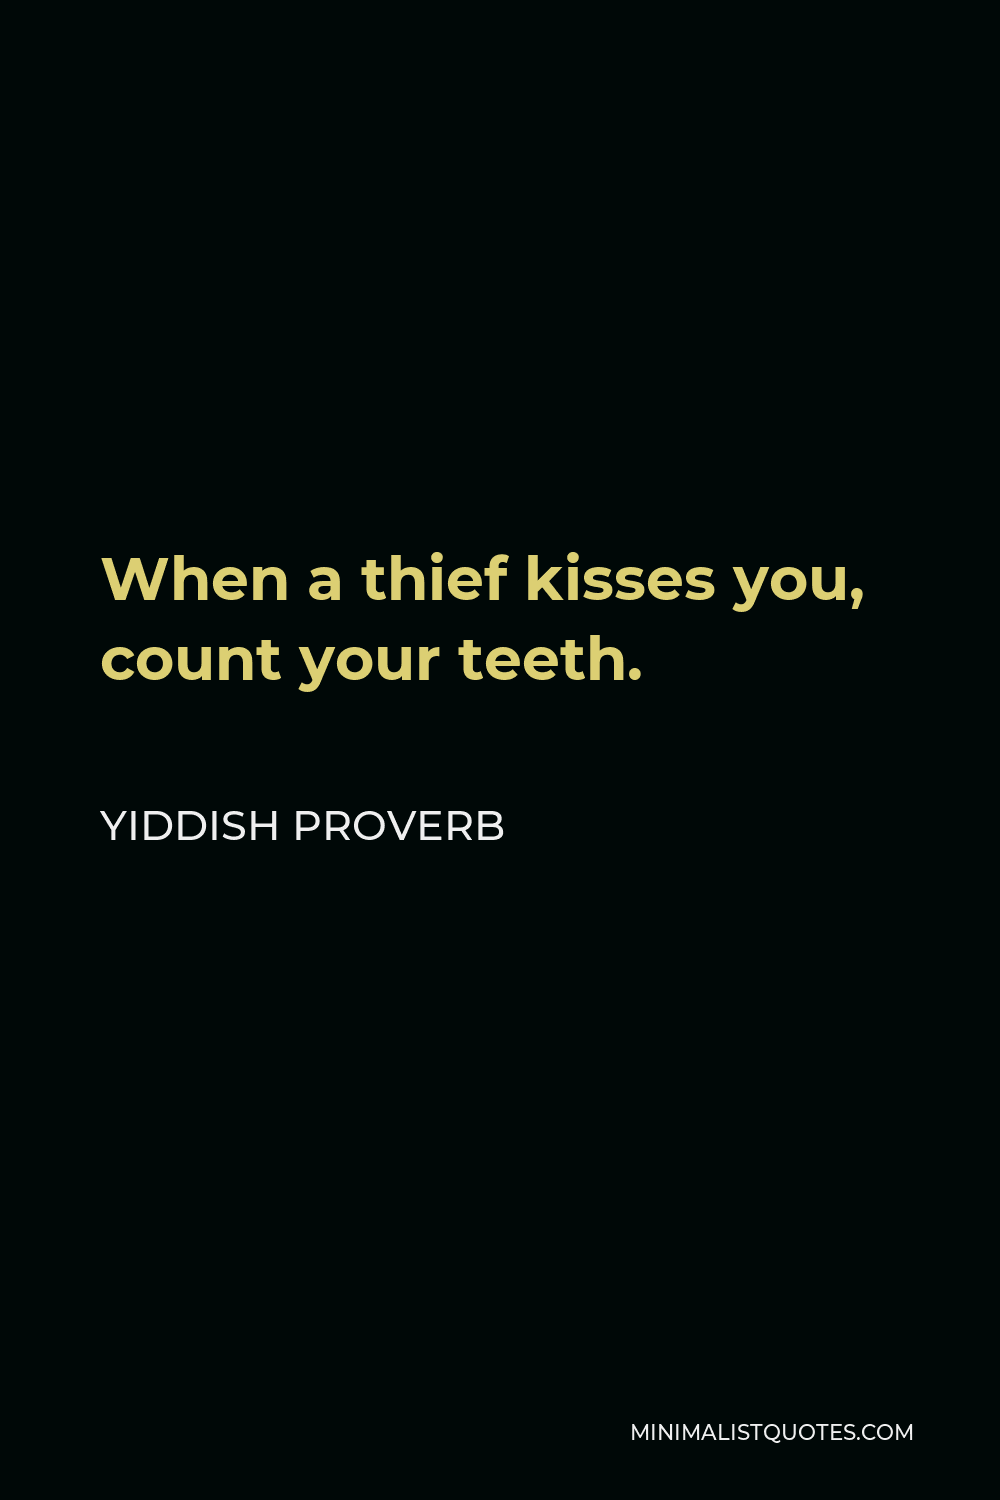 Yiddish Proverb Quote - When a thief kisses you, count your teeth.